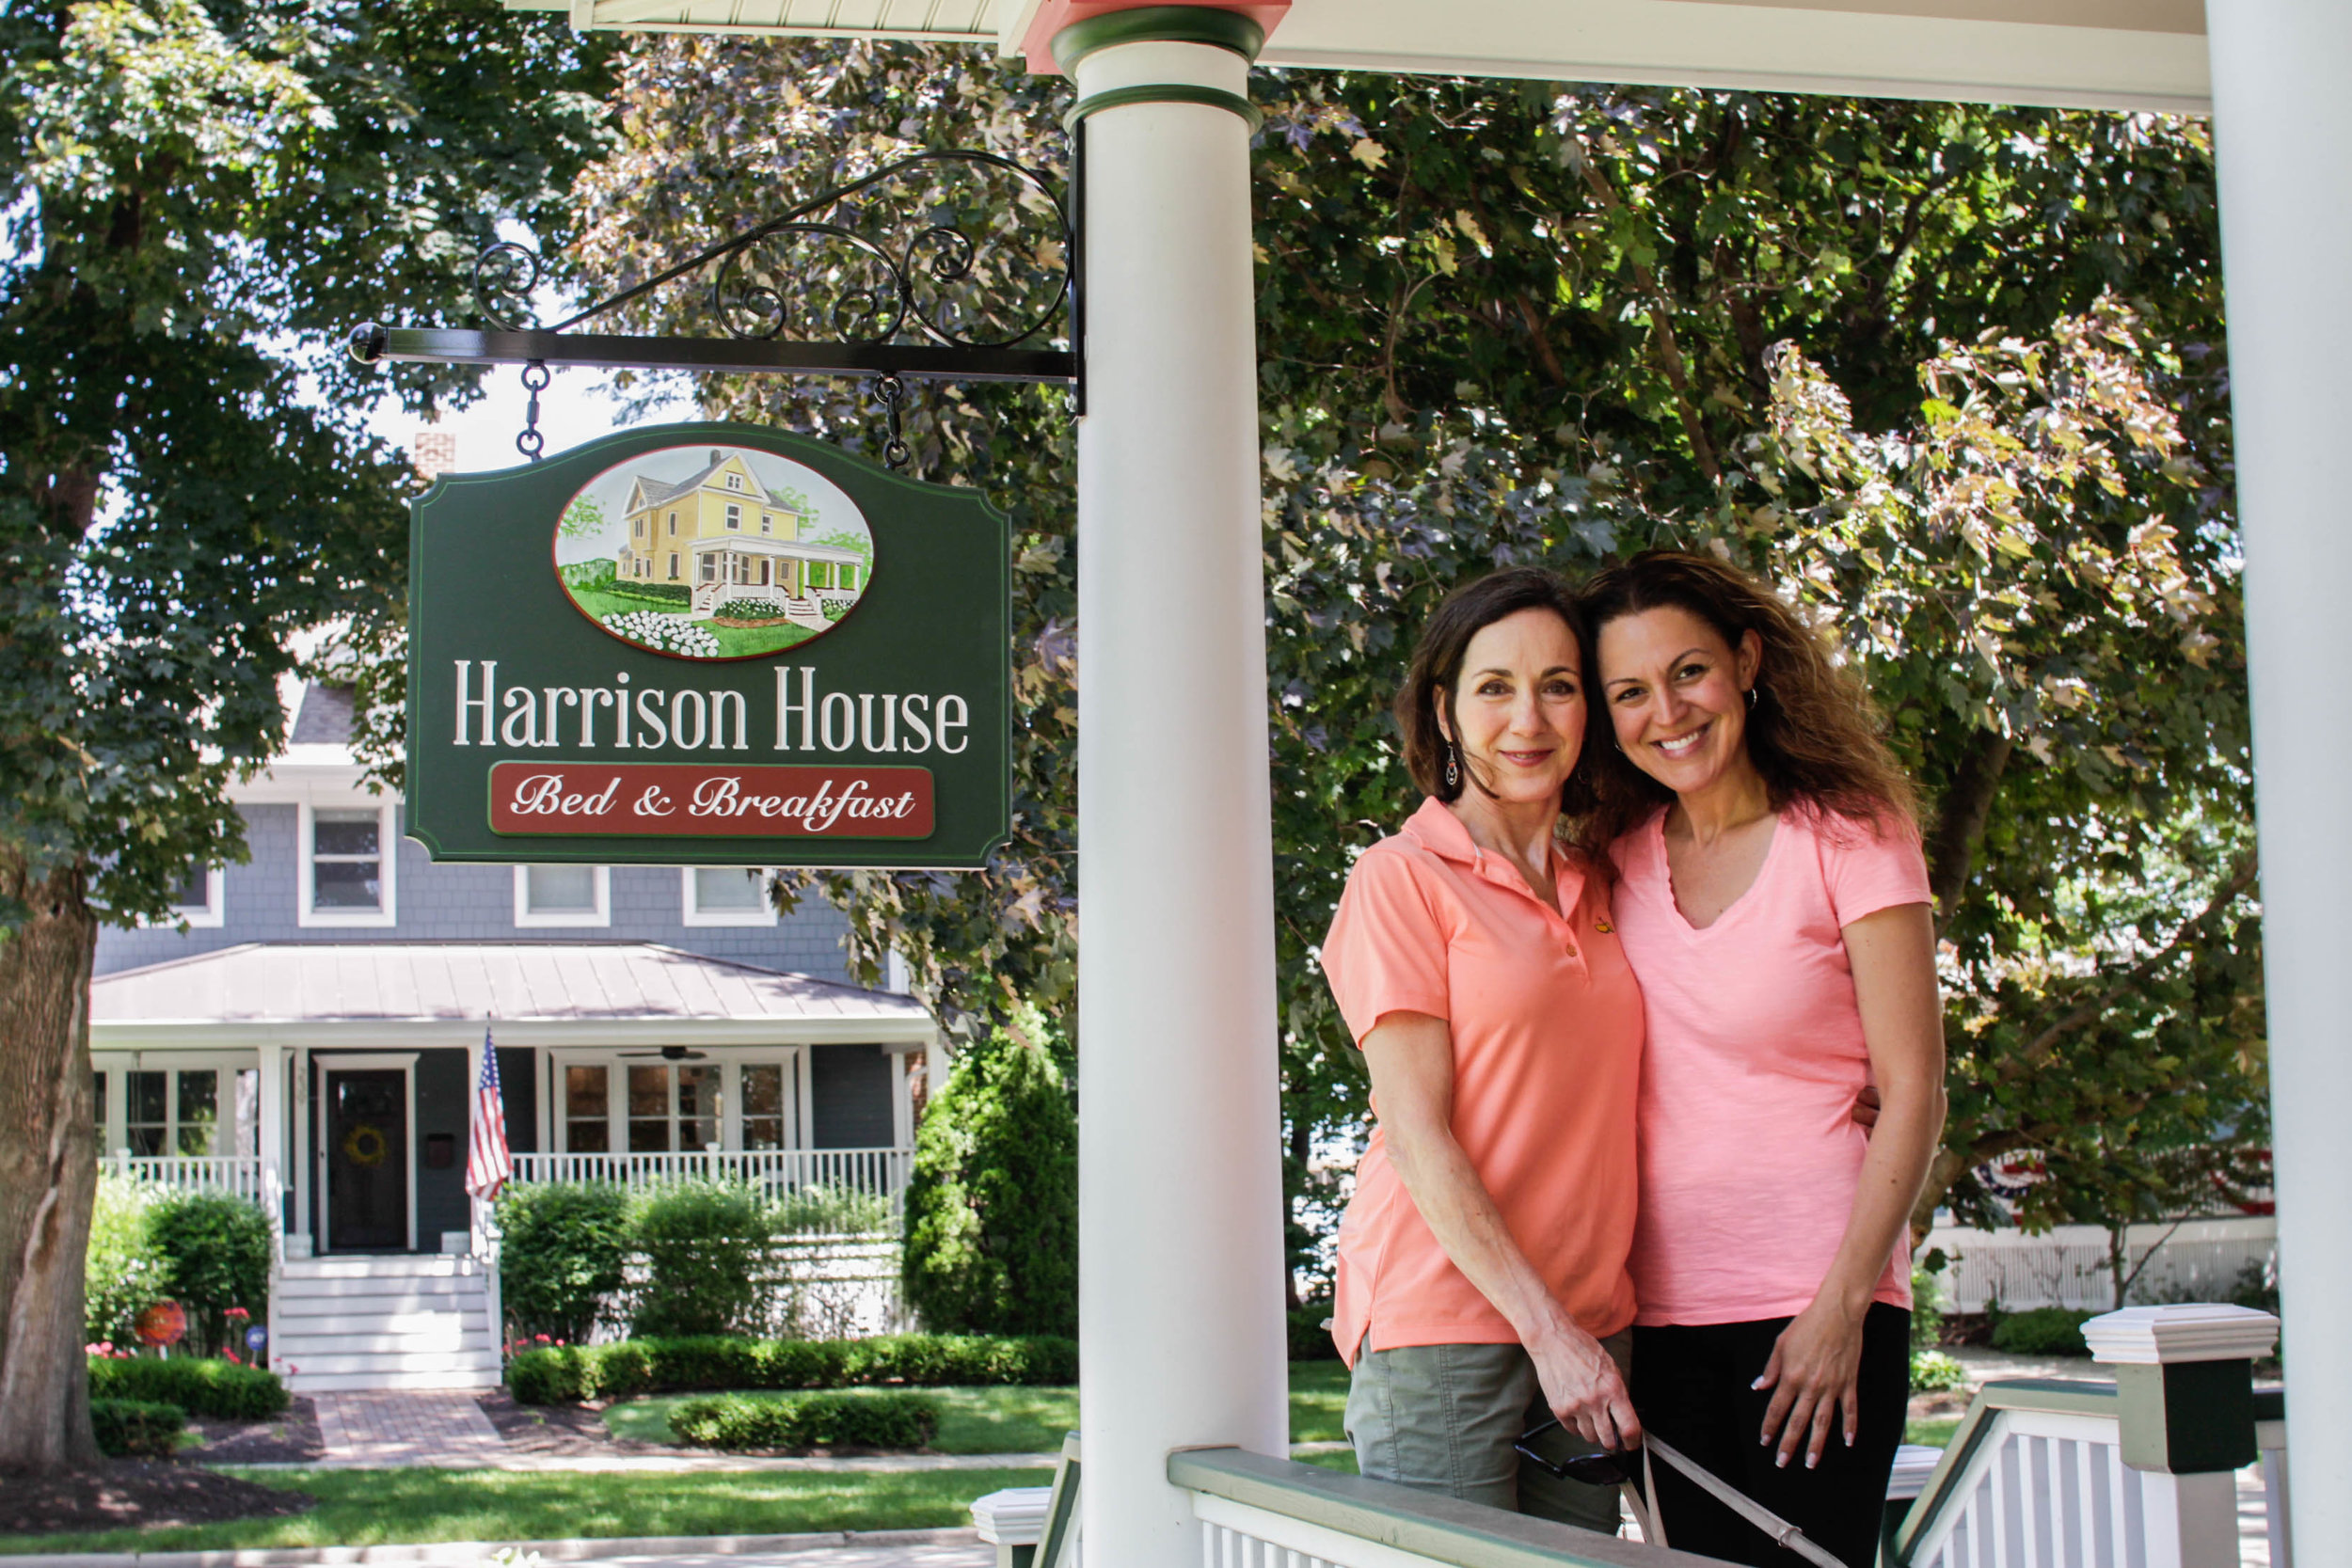 Harrison House Bed and Breakfast Historical Home in Naperville Illinois